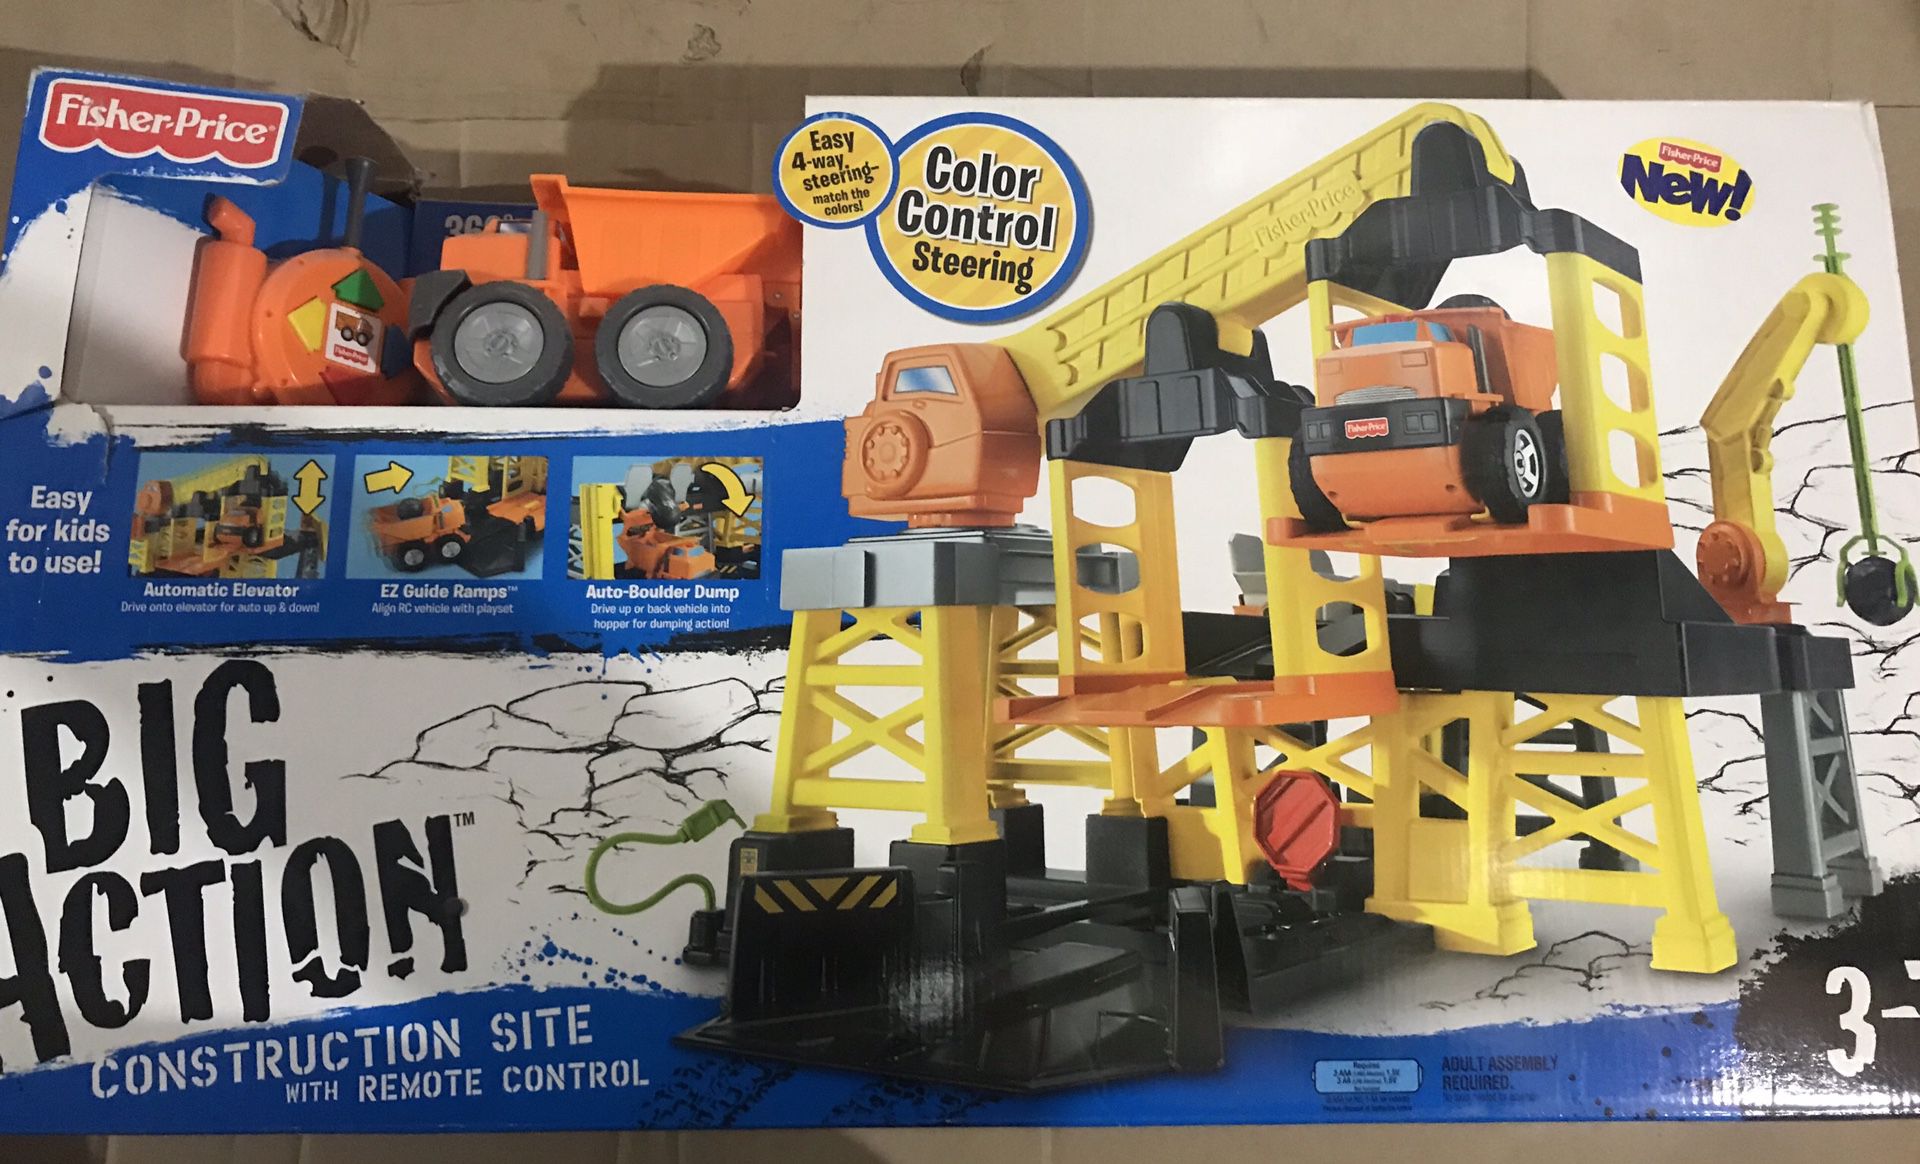 NEVER OPENED box Fisher Price Big Construction Site.